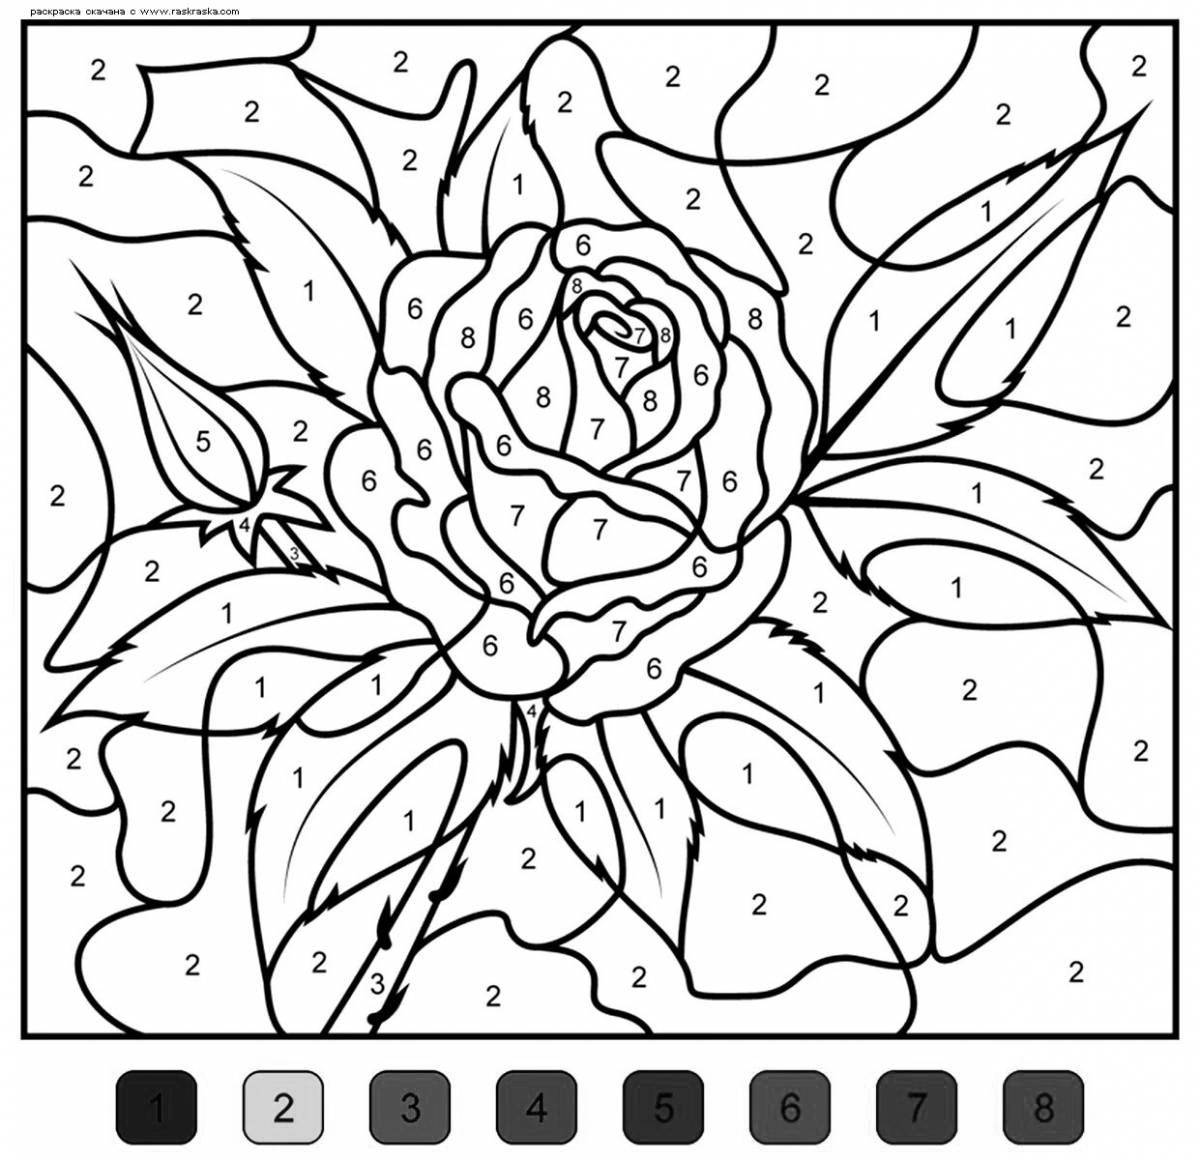 Dazzling rose coloring by numbers